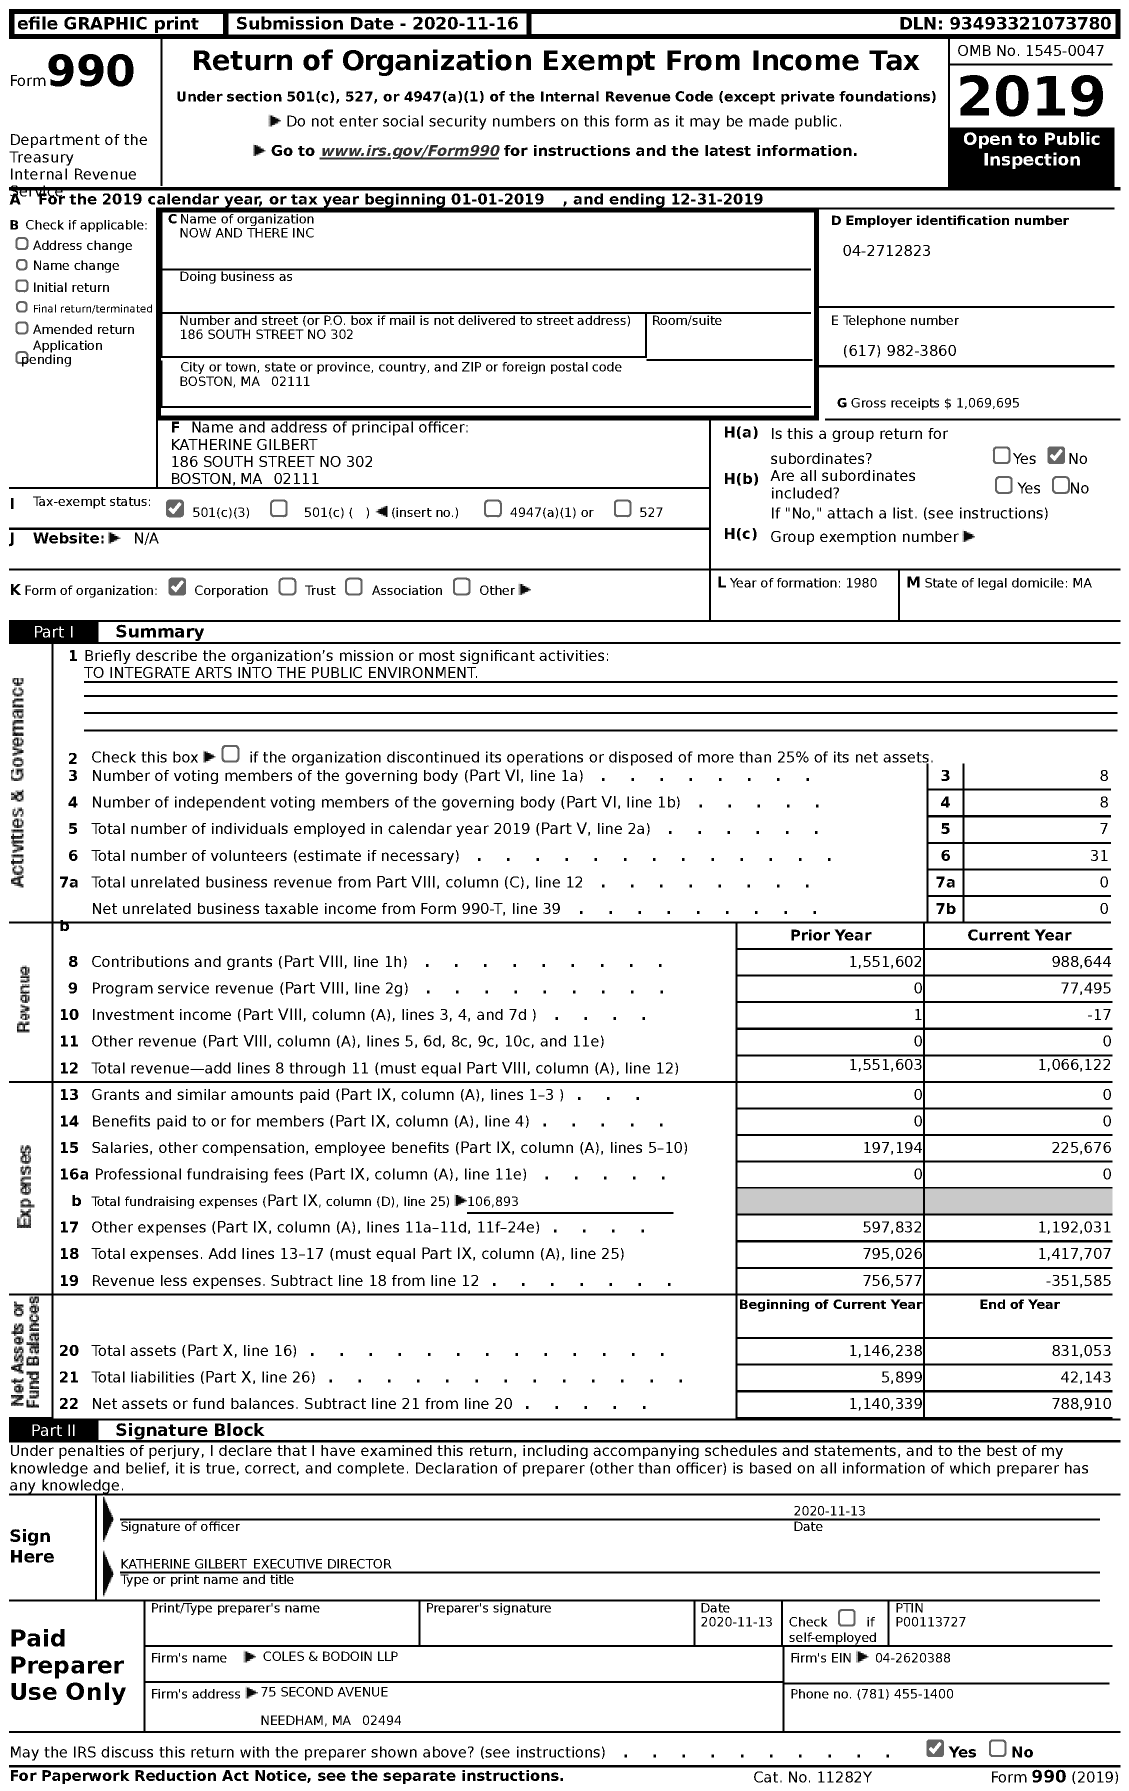 Image of first page of 2019 Form 990 for Now and There